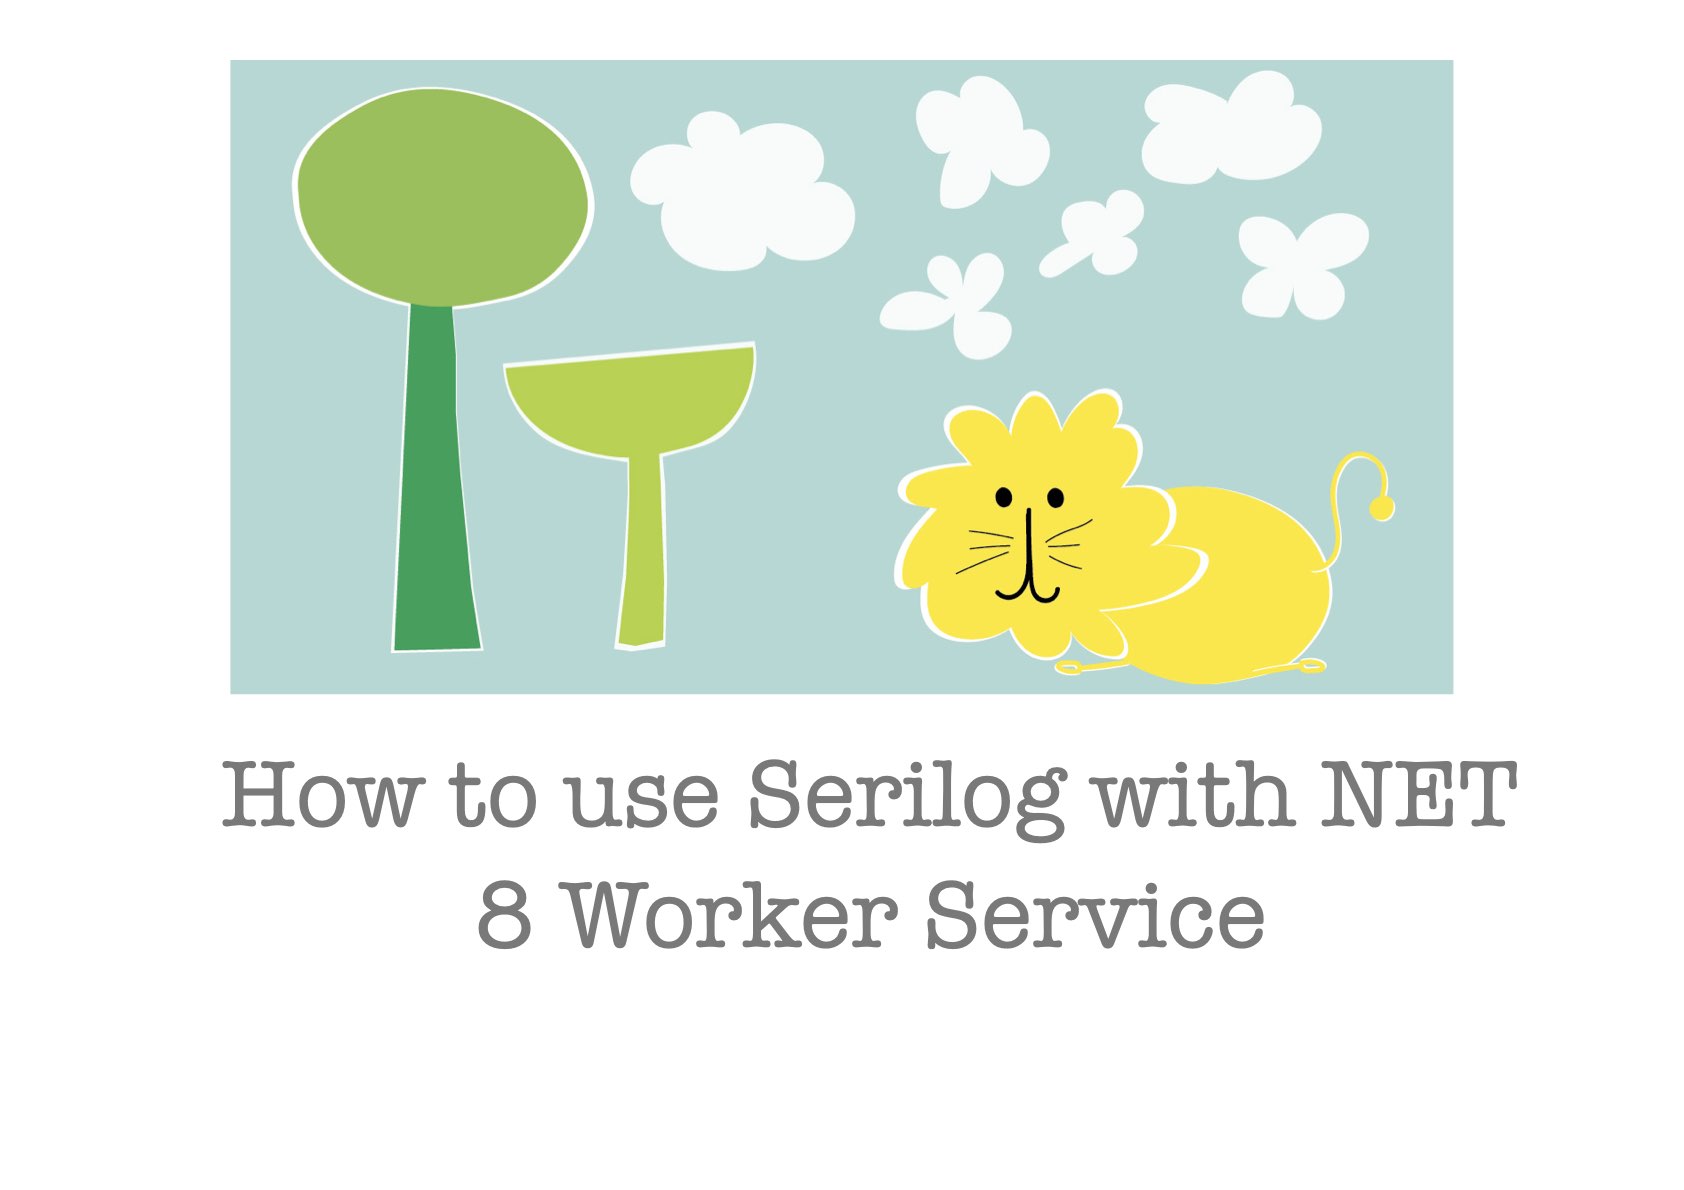 How to use Serilog with Application Builder